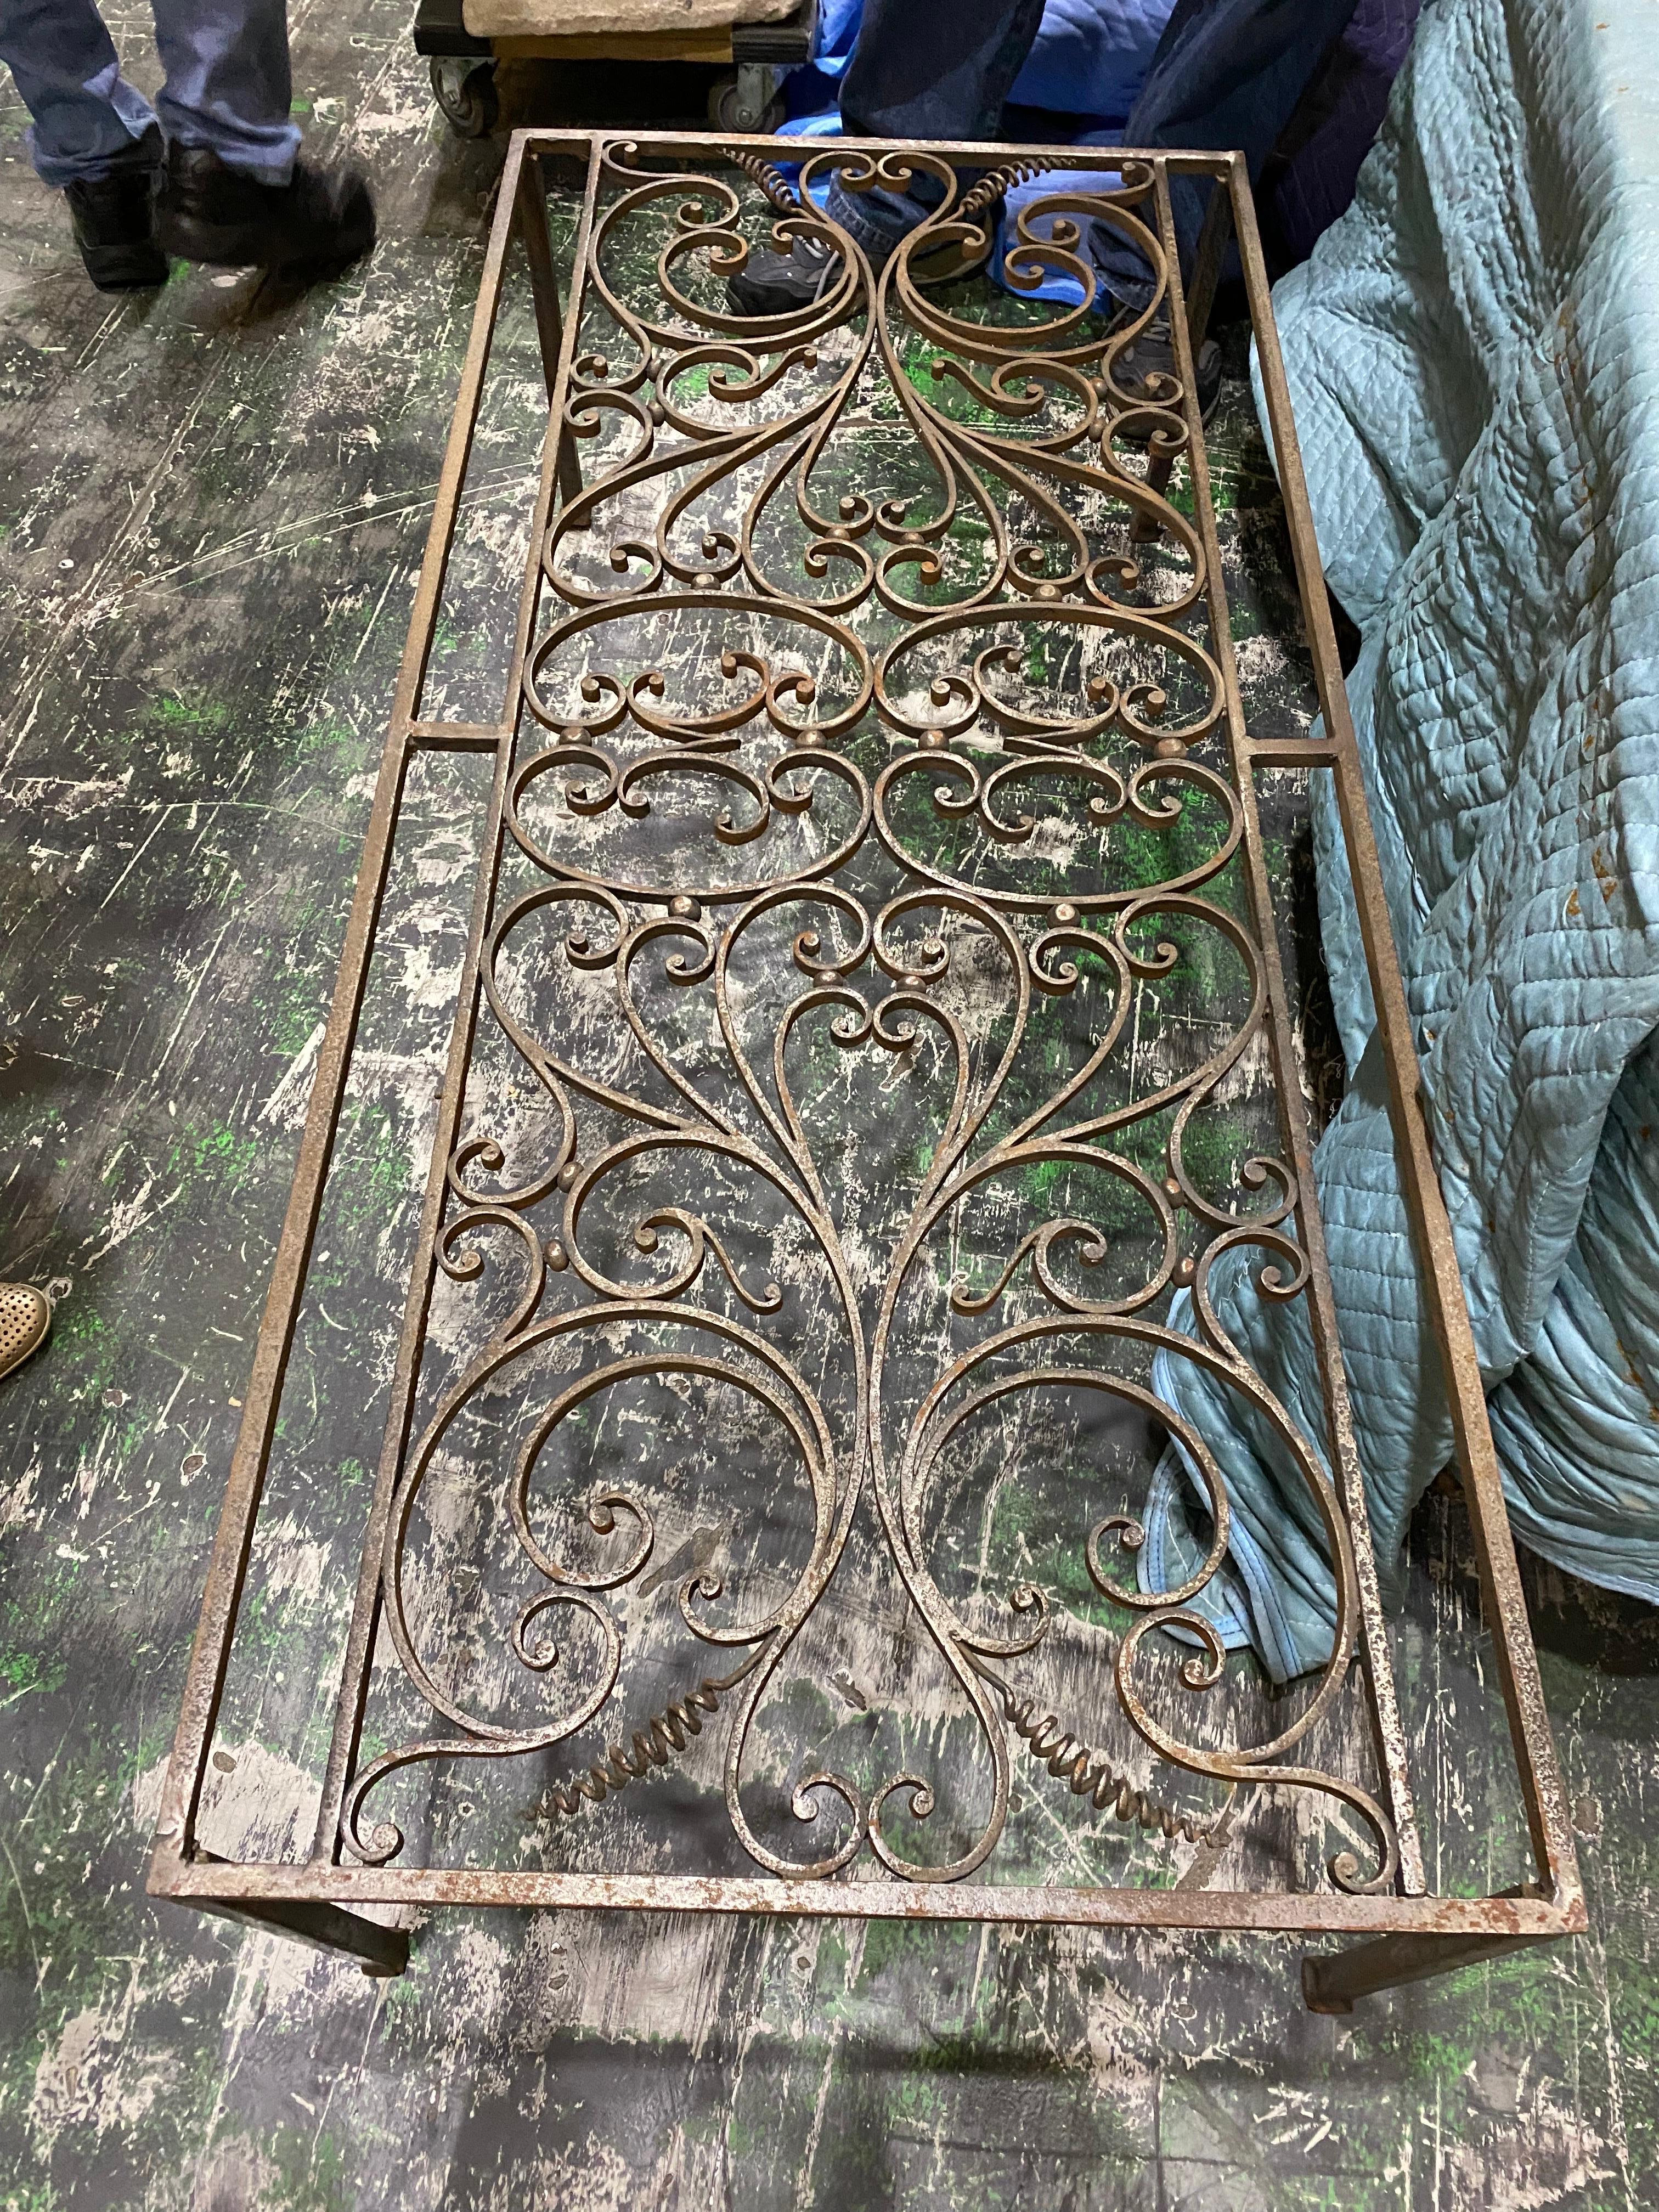 French Iron Architectural Fragment coffee table Frame with glass top
Scrolling, foliated iron fragment coffee table frame. Glass top not shown but available. Found in the Paris Puces Flea Market. Some rust to finish otherwise good